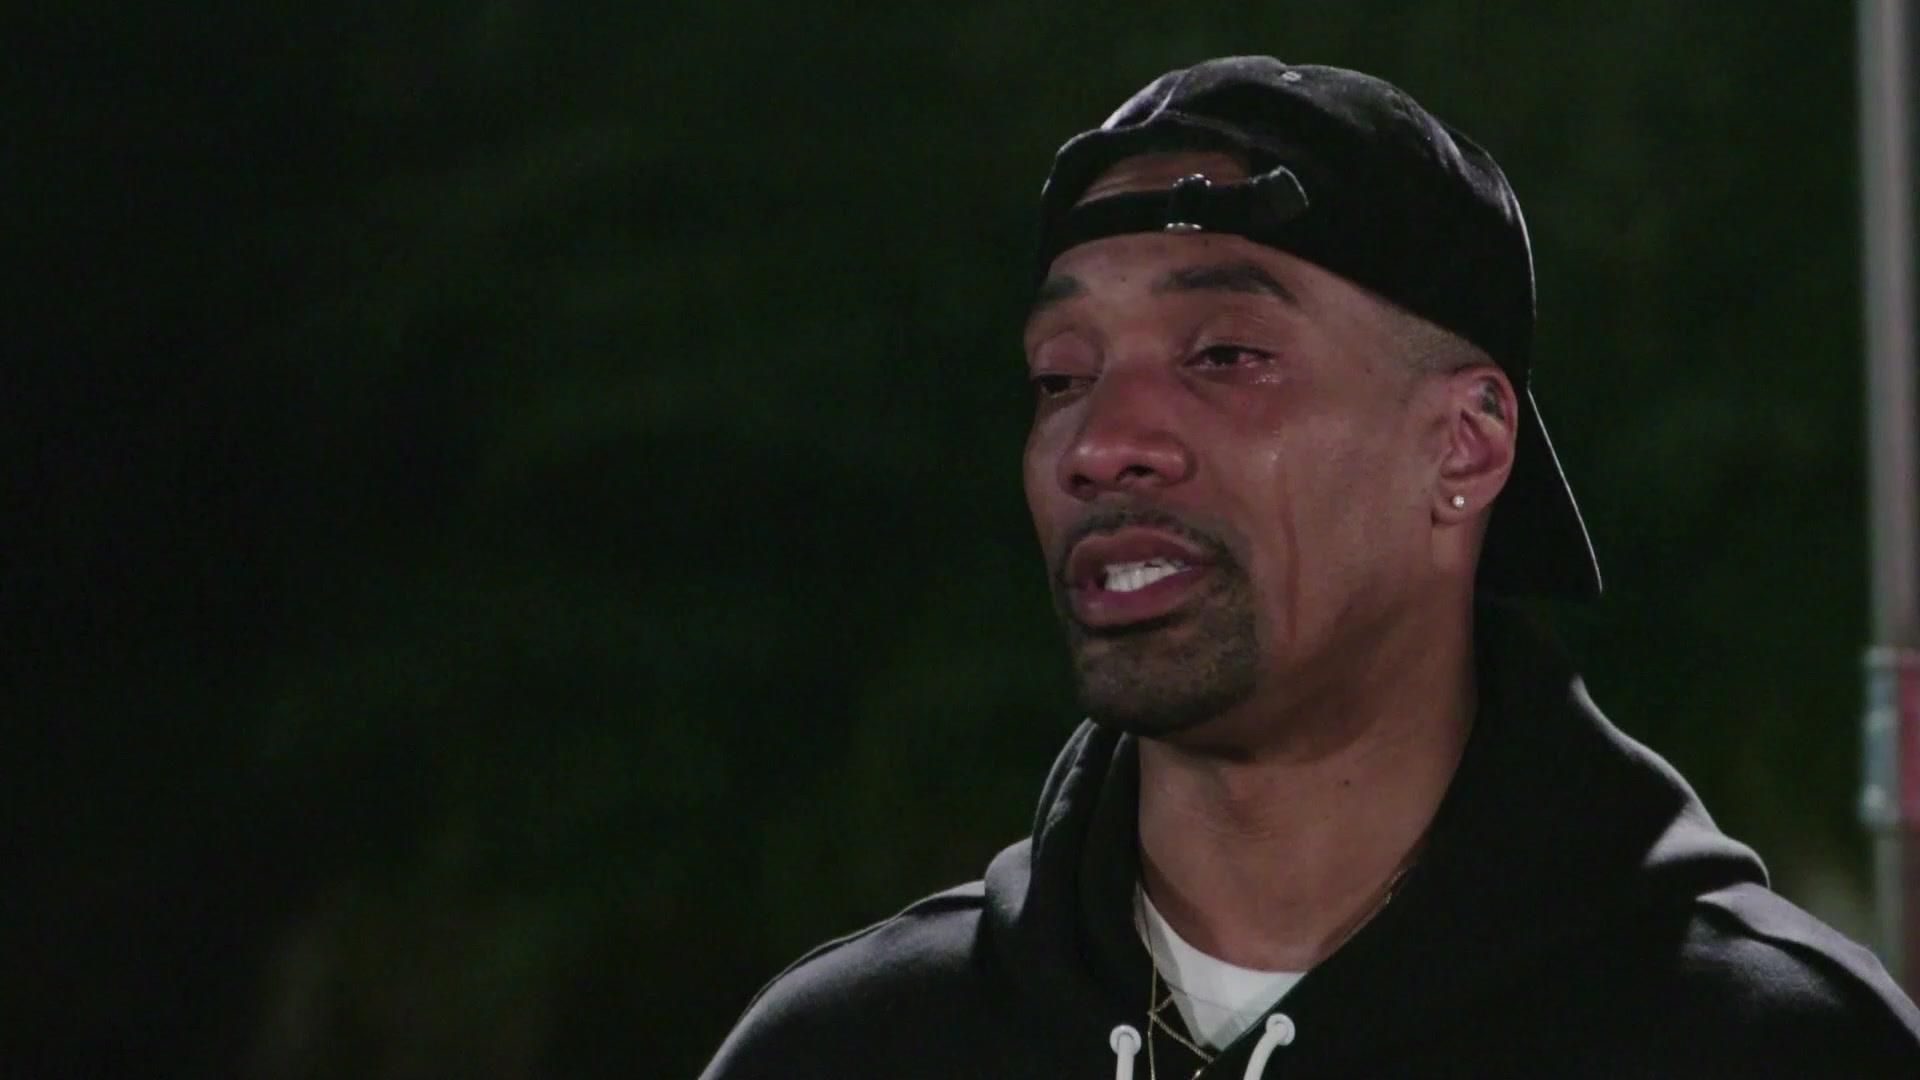 Watch Brock Gets Candid About His Childhood | Marriage Boot Camp: Hip Hop Edition Video Extras